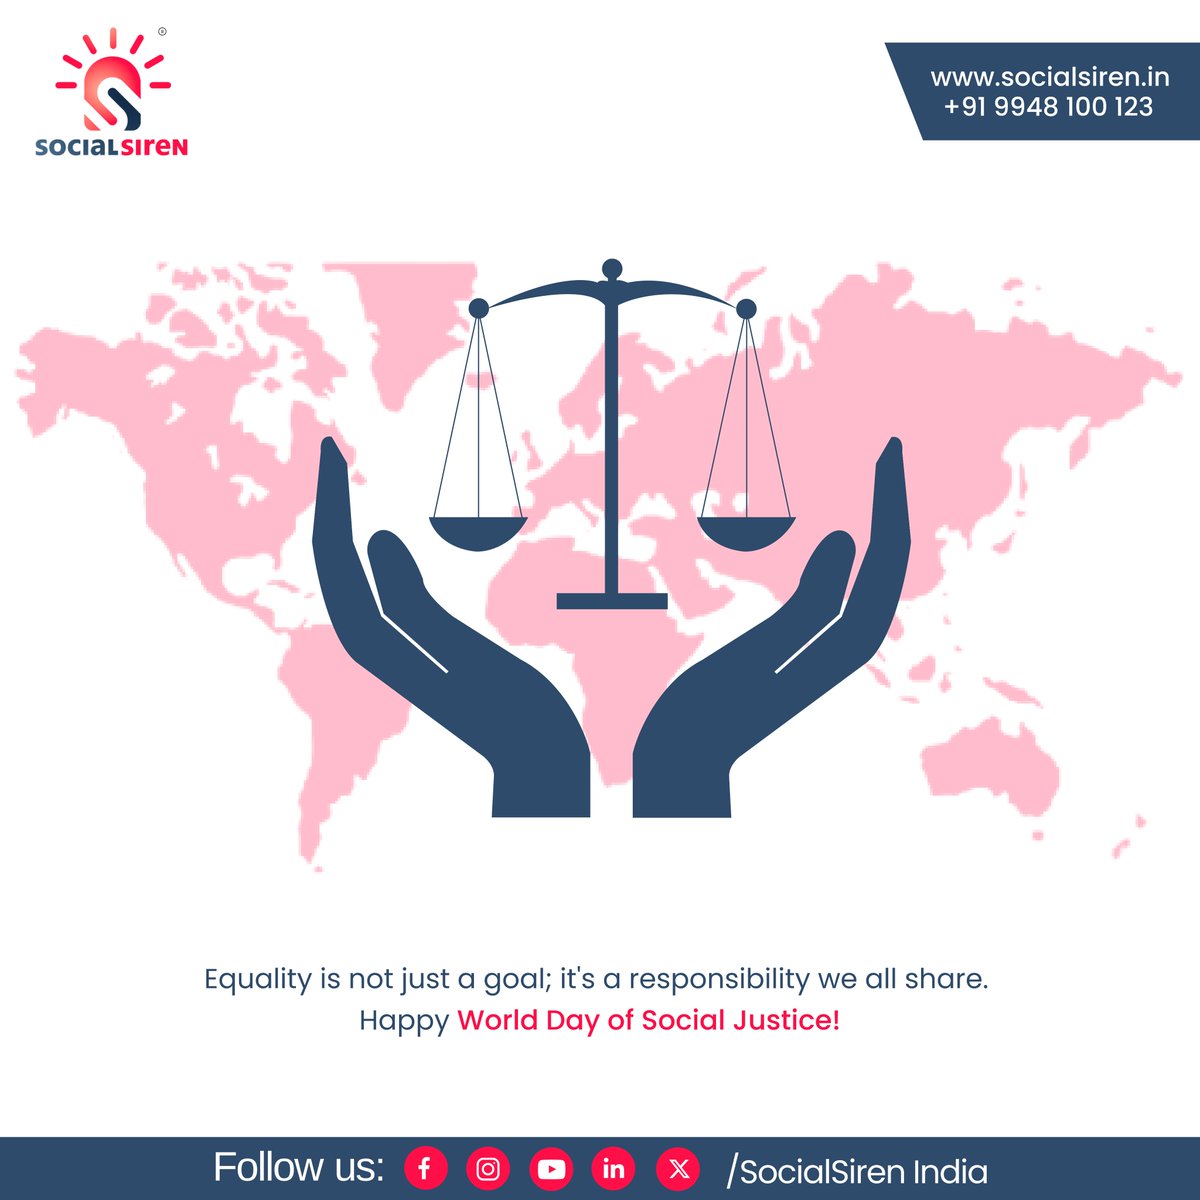 Equality is not just a goal; it's a responsibility we all share. Happy World Day of Social Justice! Let's strive for a world where justice and equality prevail.

#worldsocialjusticeday #equalityforall #TogetherForJustice #globalresponsibility

#SocialSiren #SocialSirenIndia